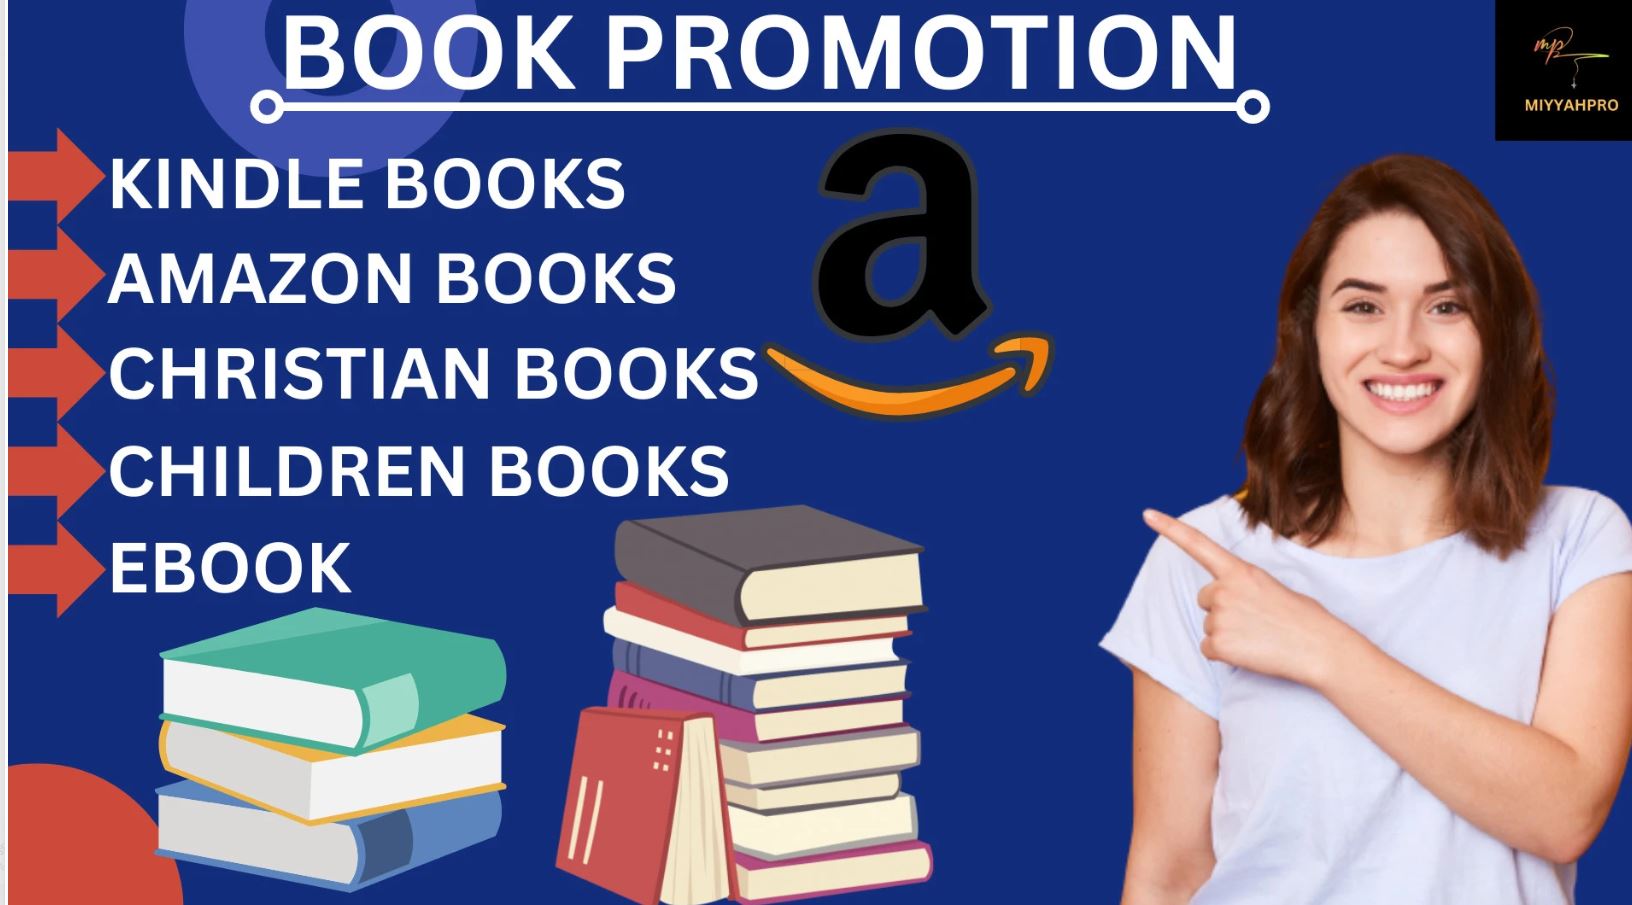 I will childrens book promotion tik tok promotion book funnel and more